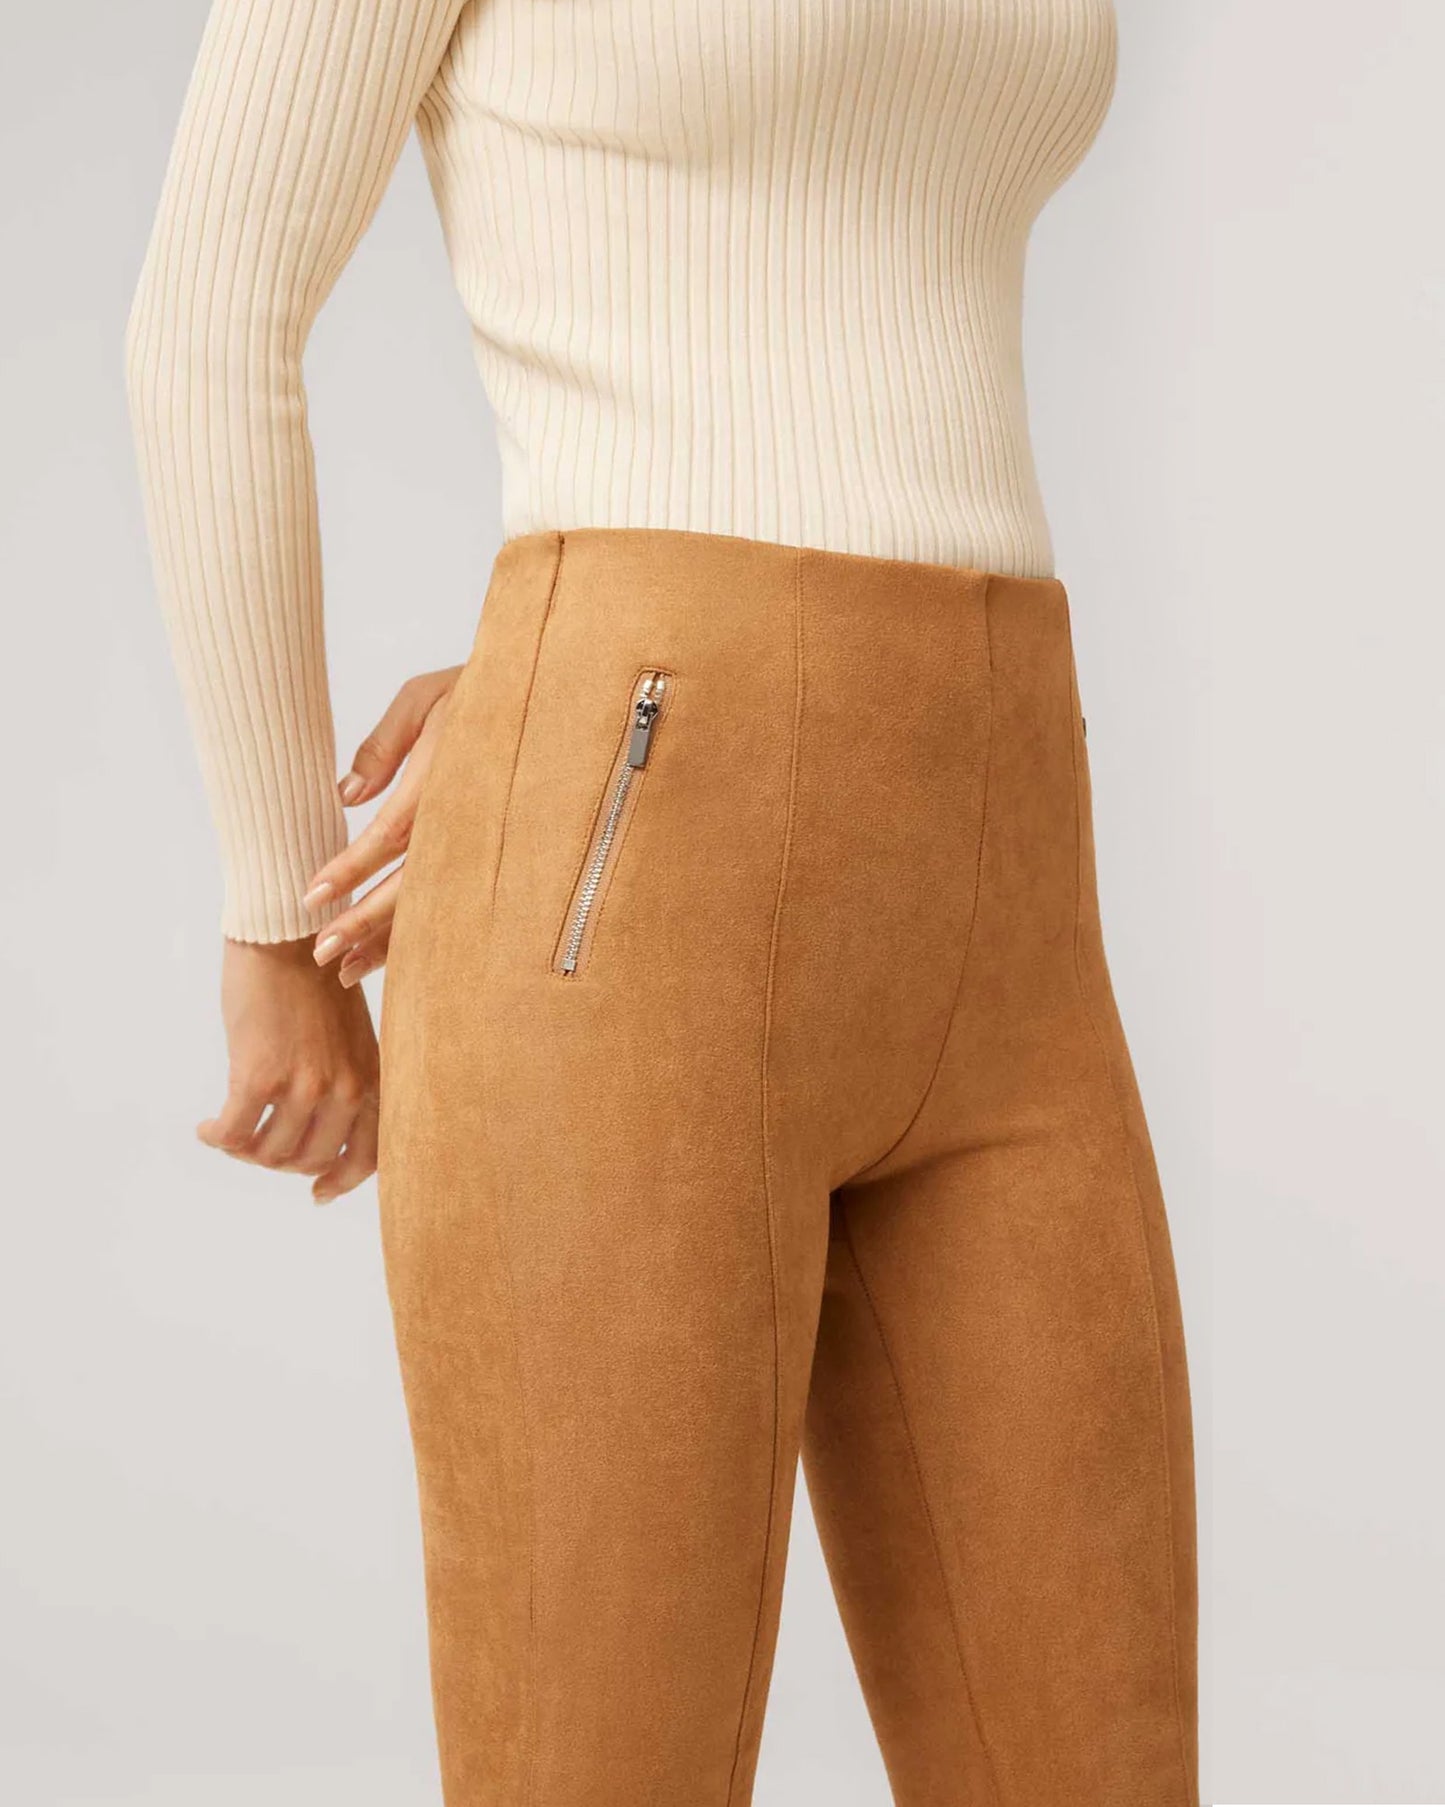 Ysabel Mora 70297 Faux Suede Leggings - Camel / tan velvet suede effect high waisted trouser leggings (treggings) with raised seam down the front and zipper details on the sides.